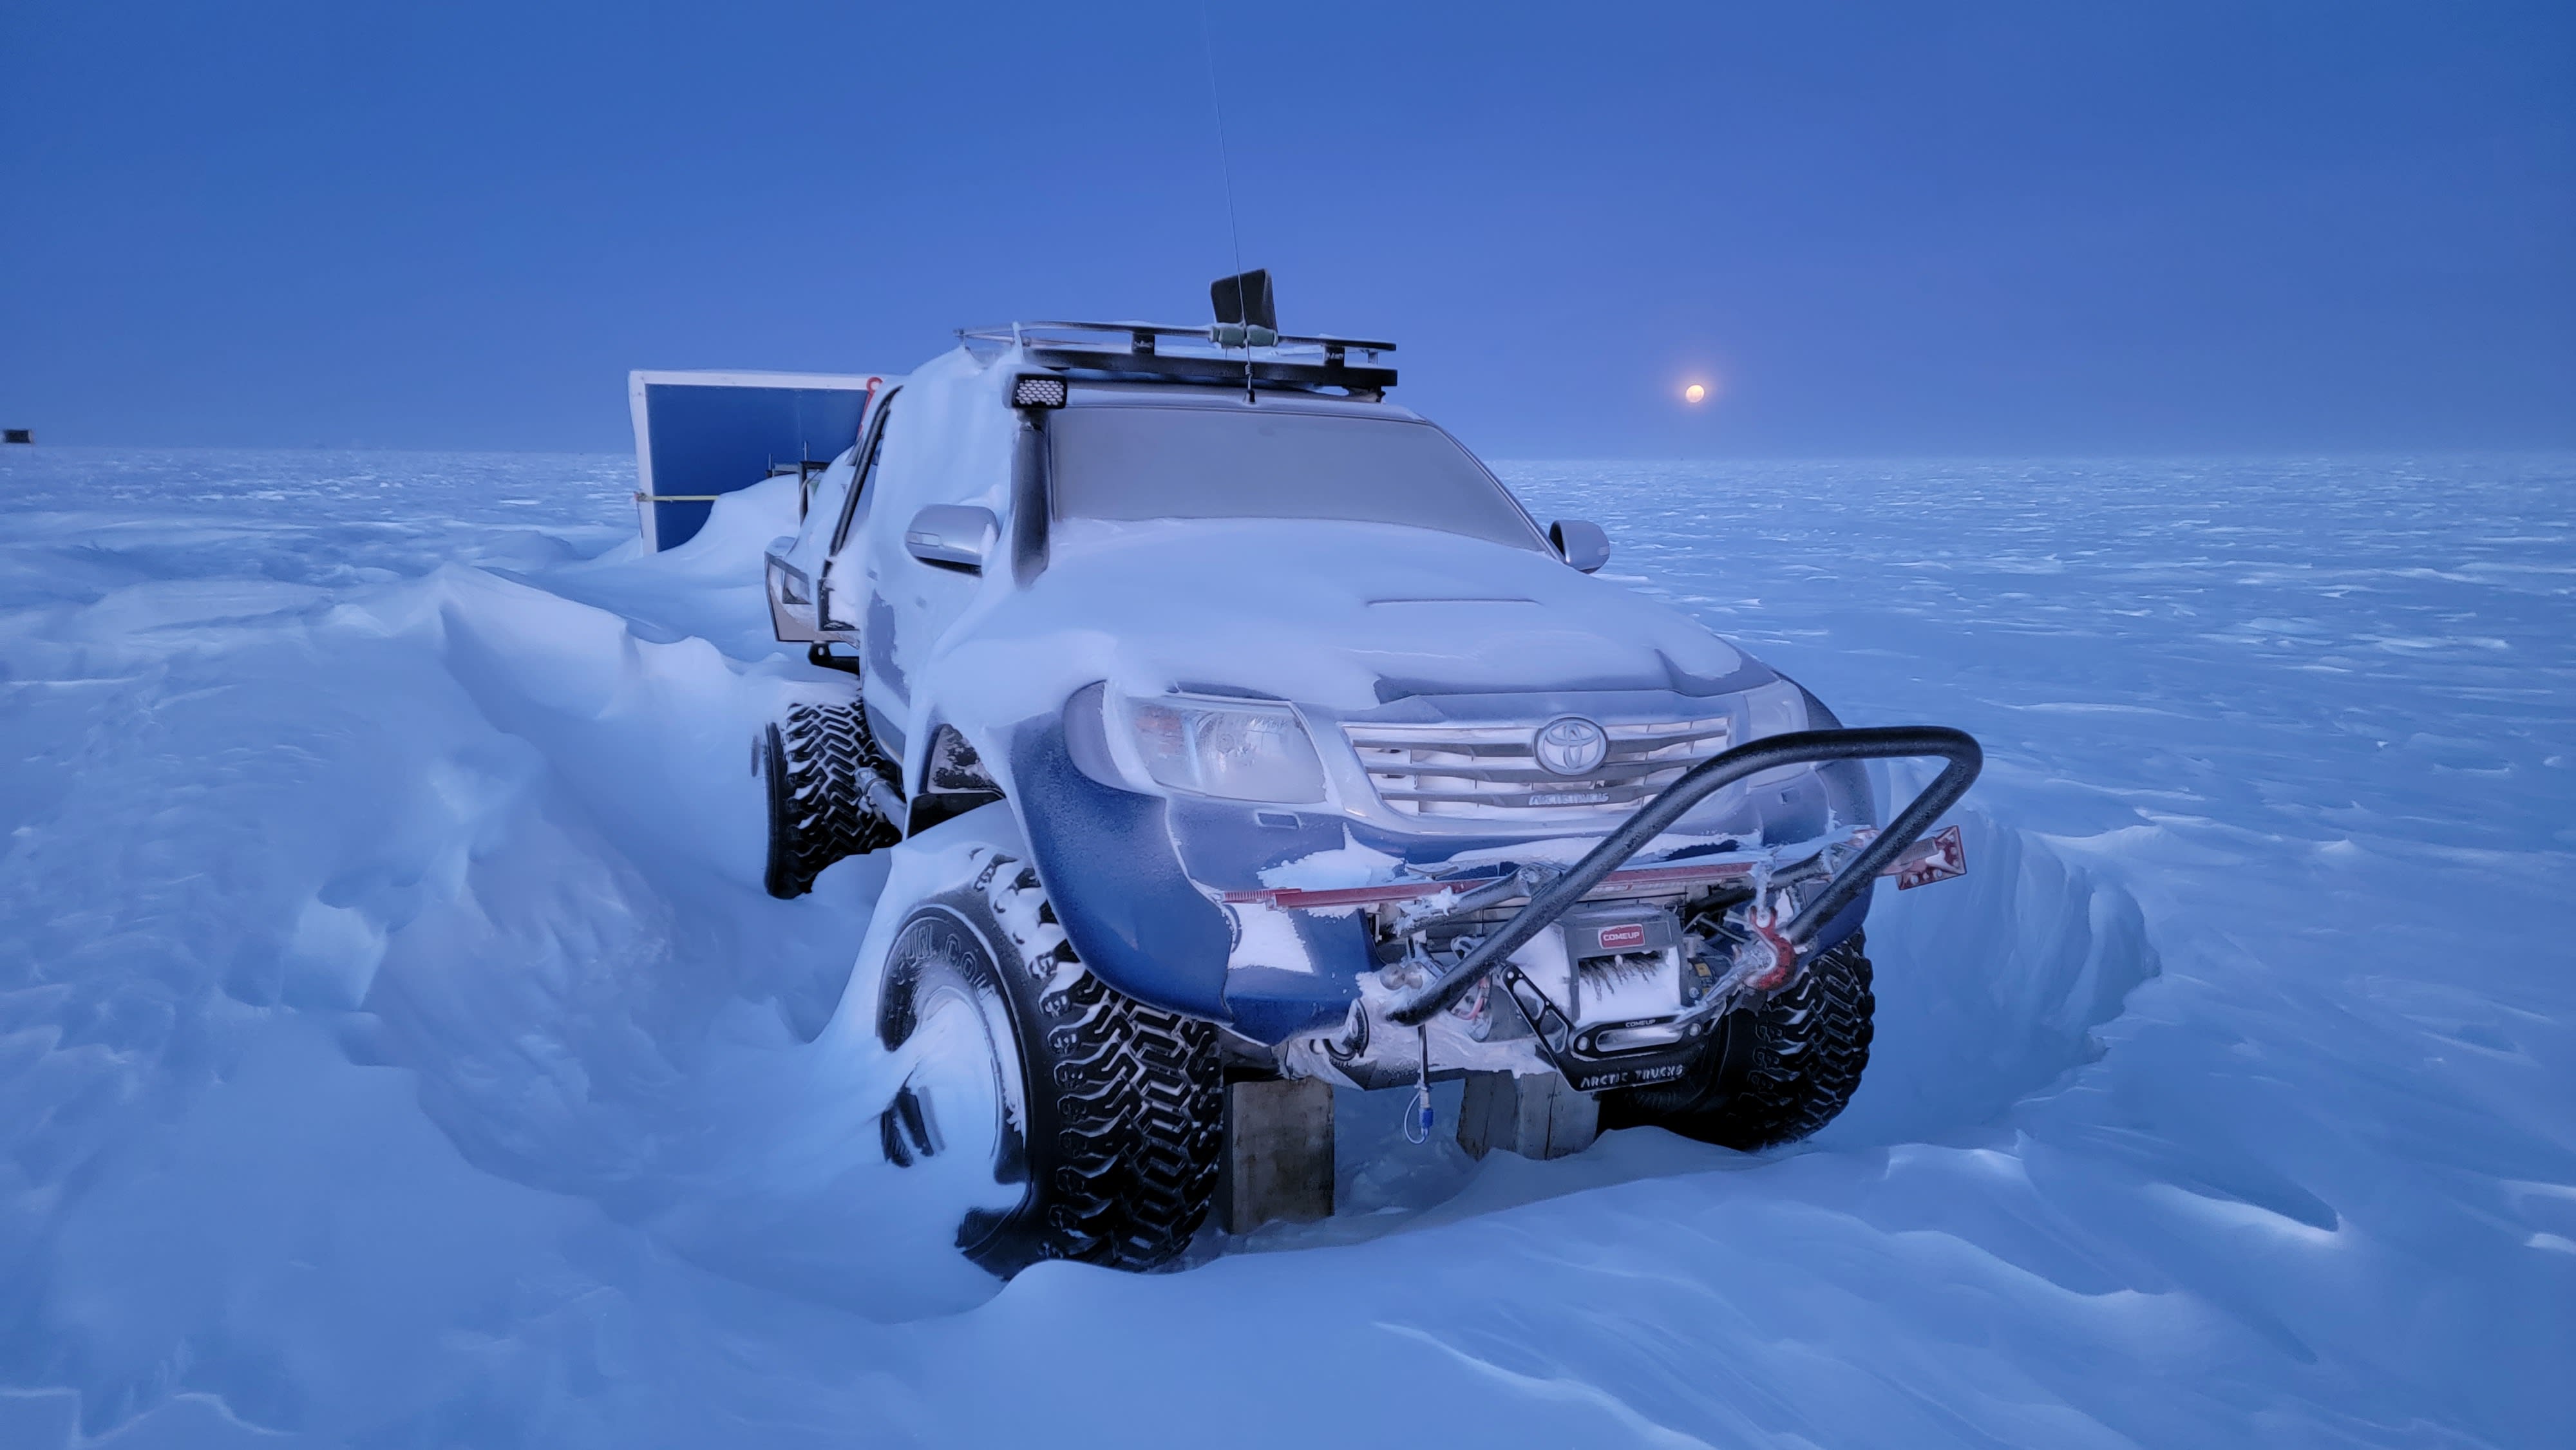 Front view of vehicle partially buried in snow at South Pole during twilight.